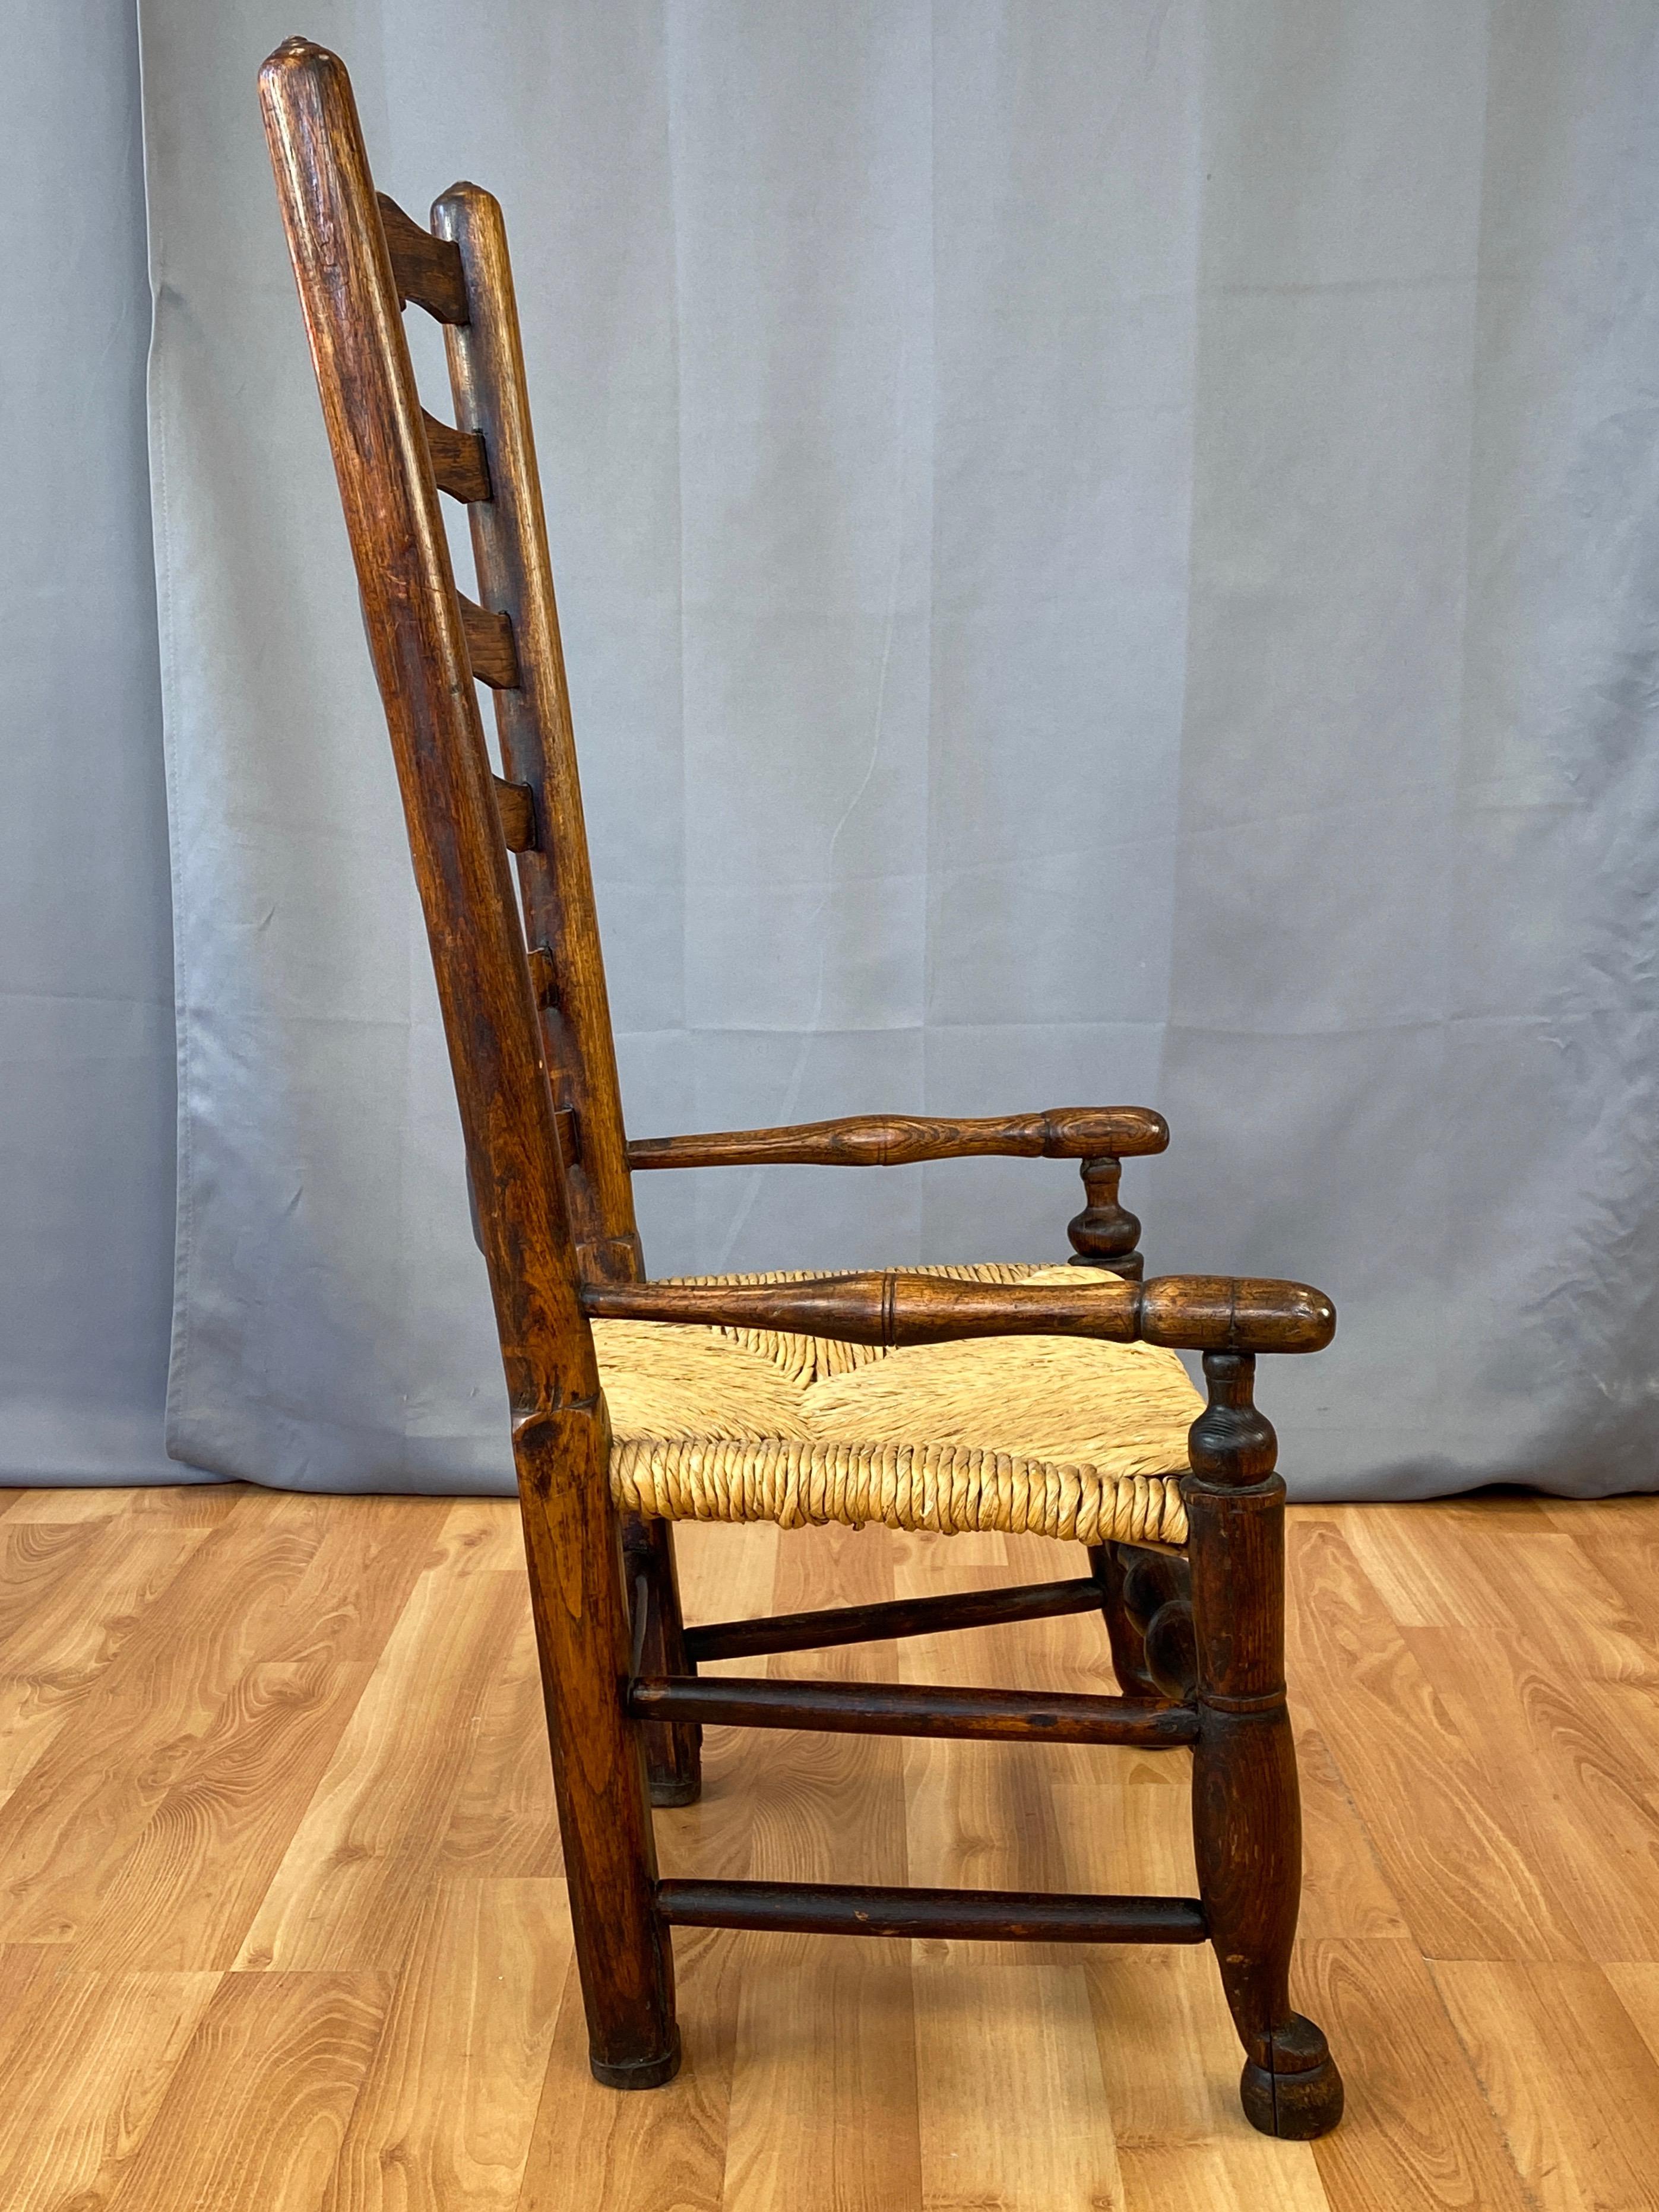 Early 19th Century English Georgian Period Elm Ladderback Fireside Armchair with Rush Seat, c. 1800 For Sale